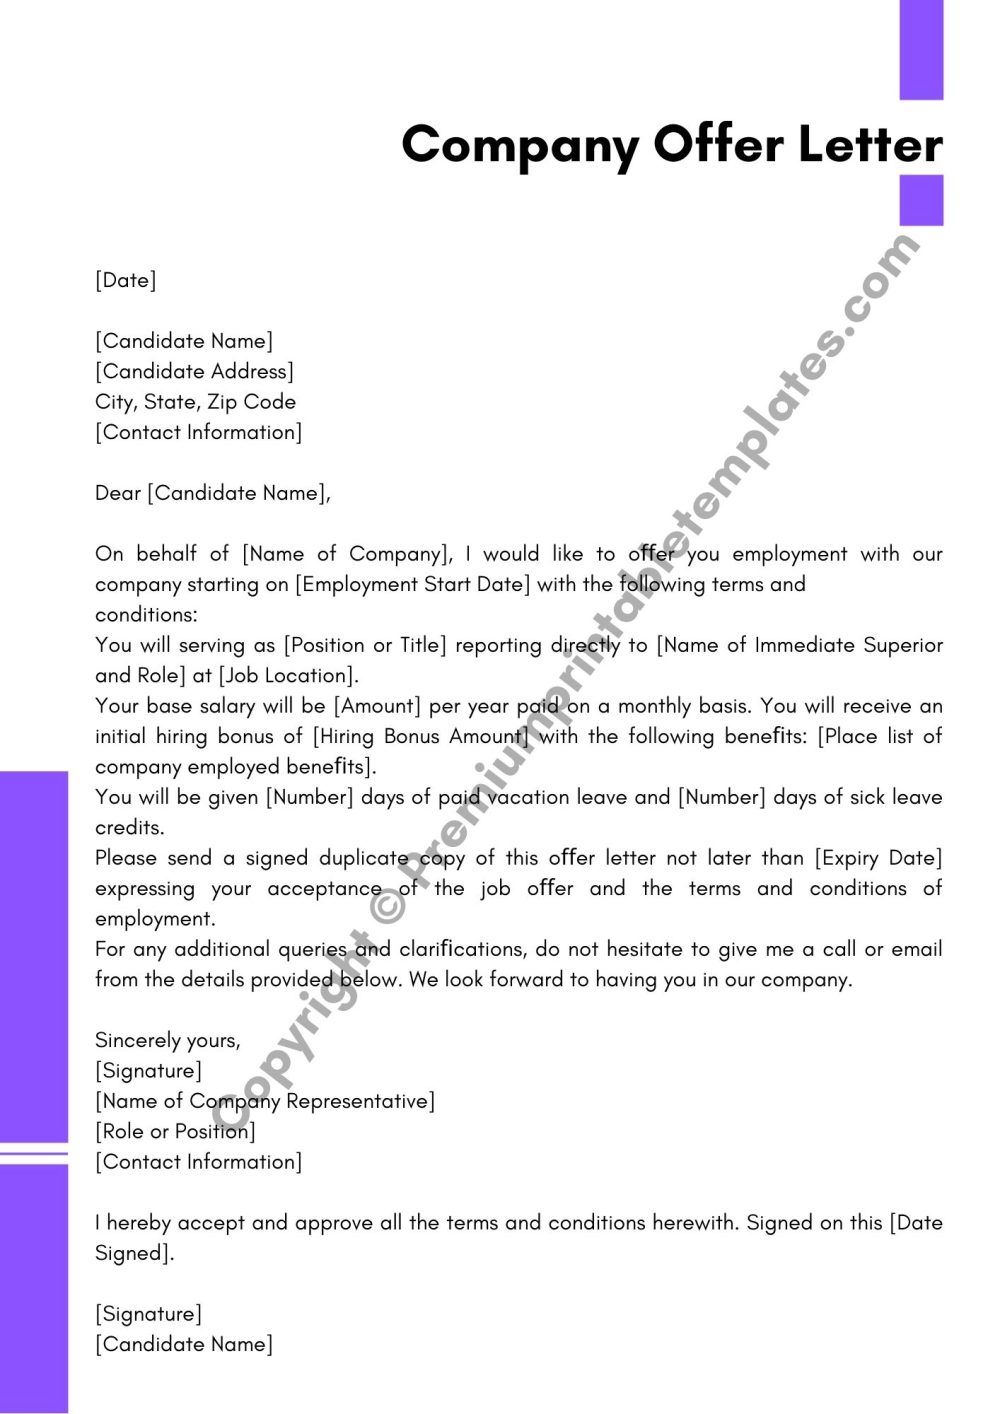 Company Offer Letter | Editable | PDF [Pack of 8] - Premium Printable